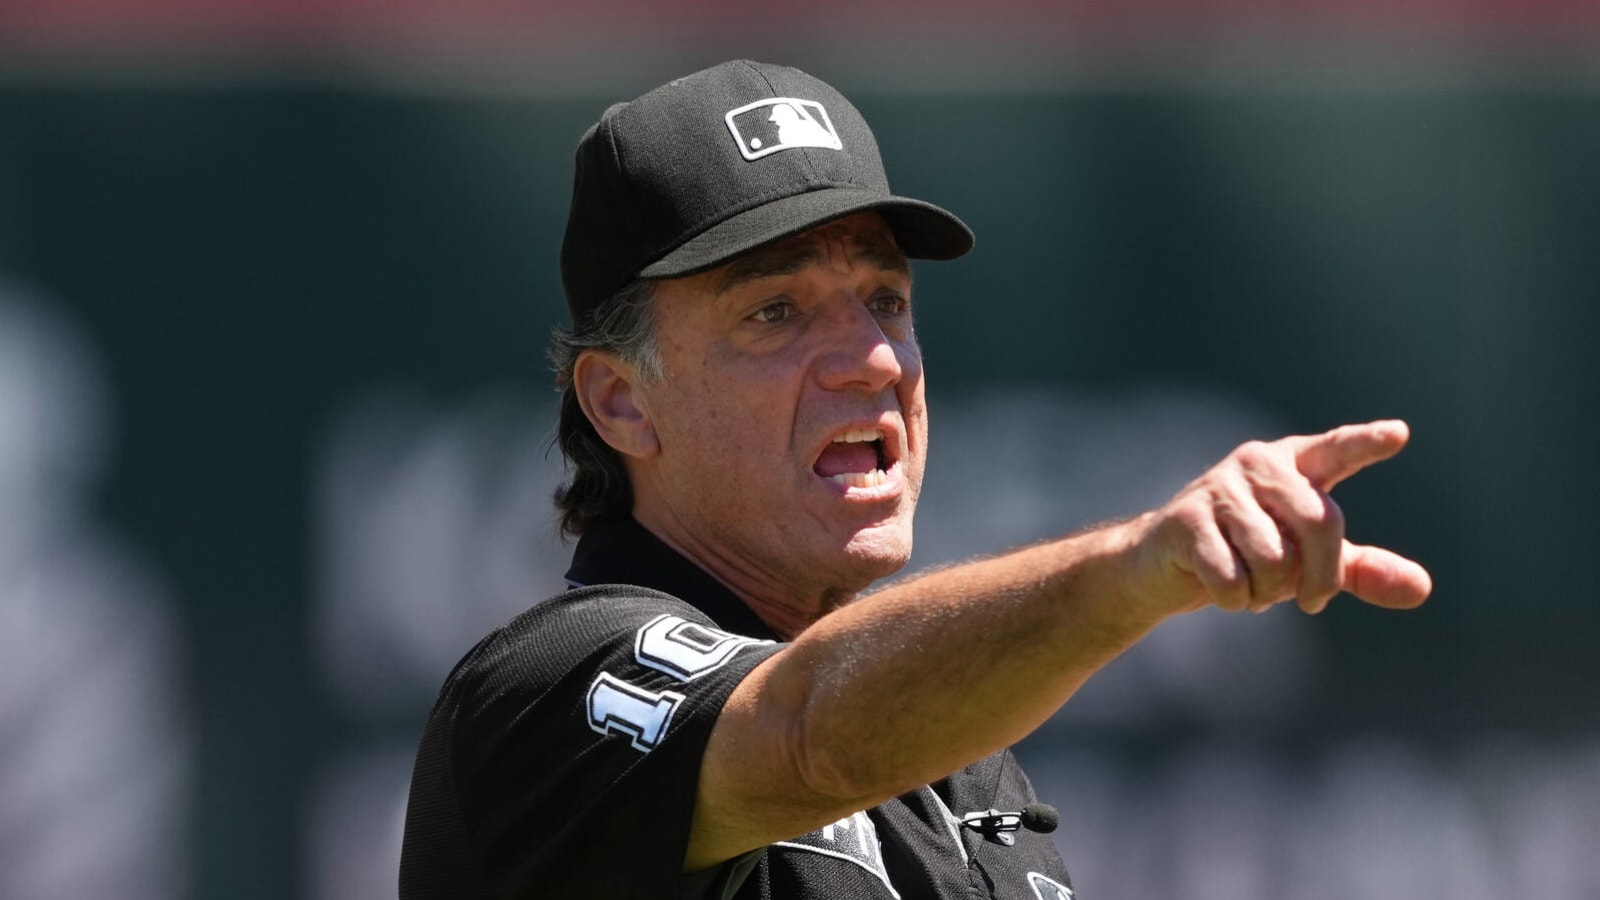 Umpire under fire for poor performance in MLB game